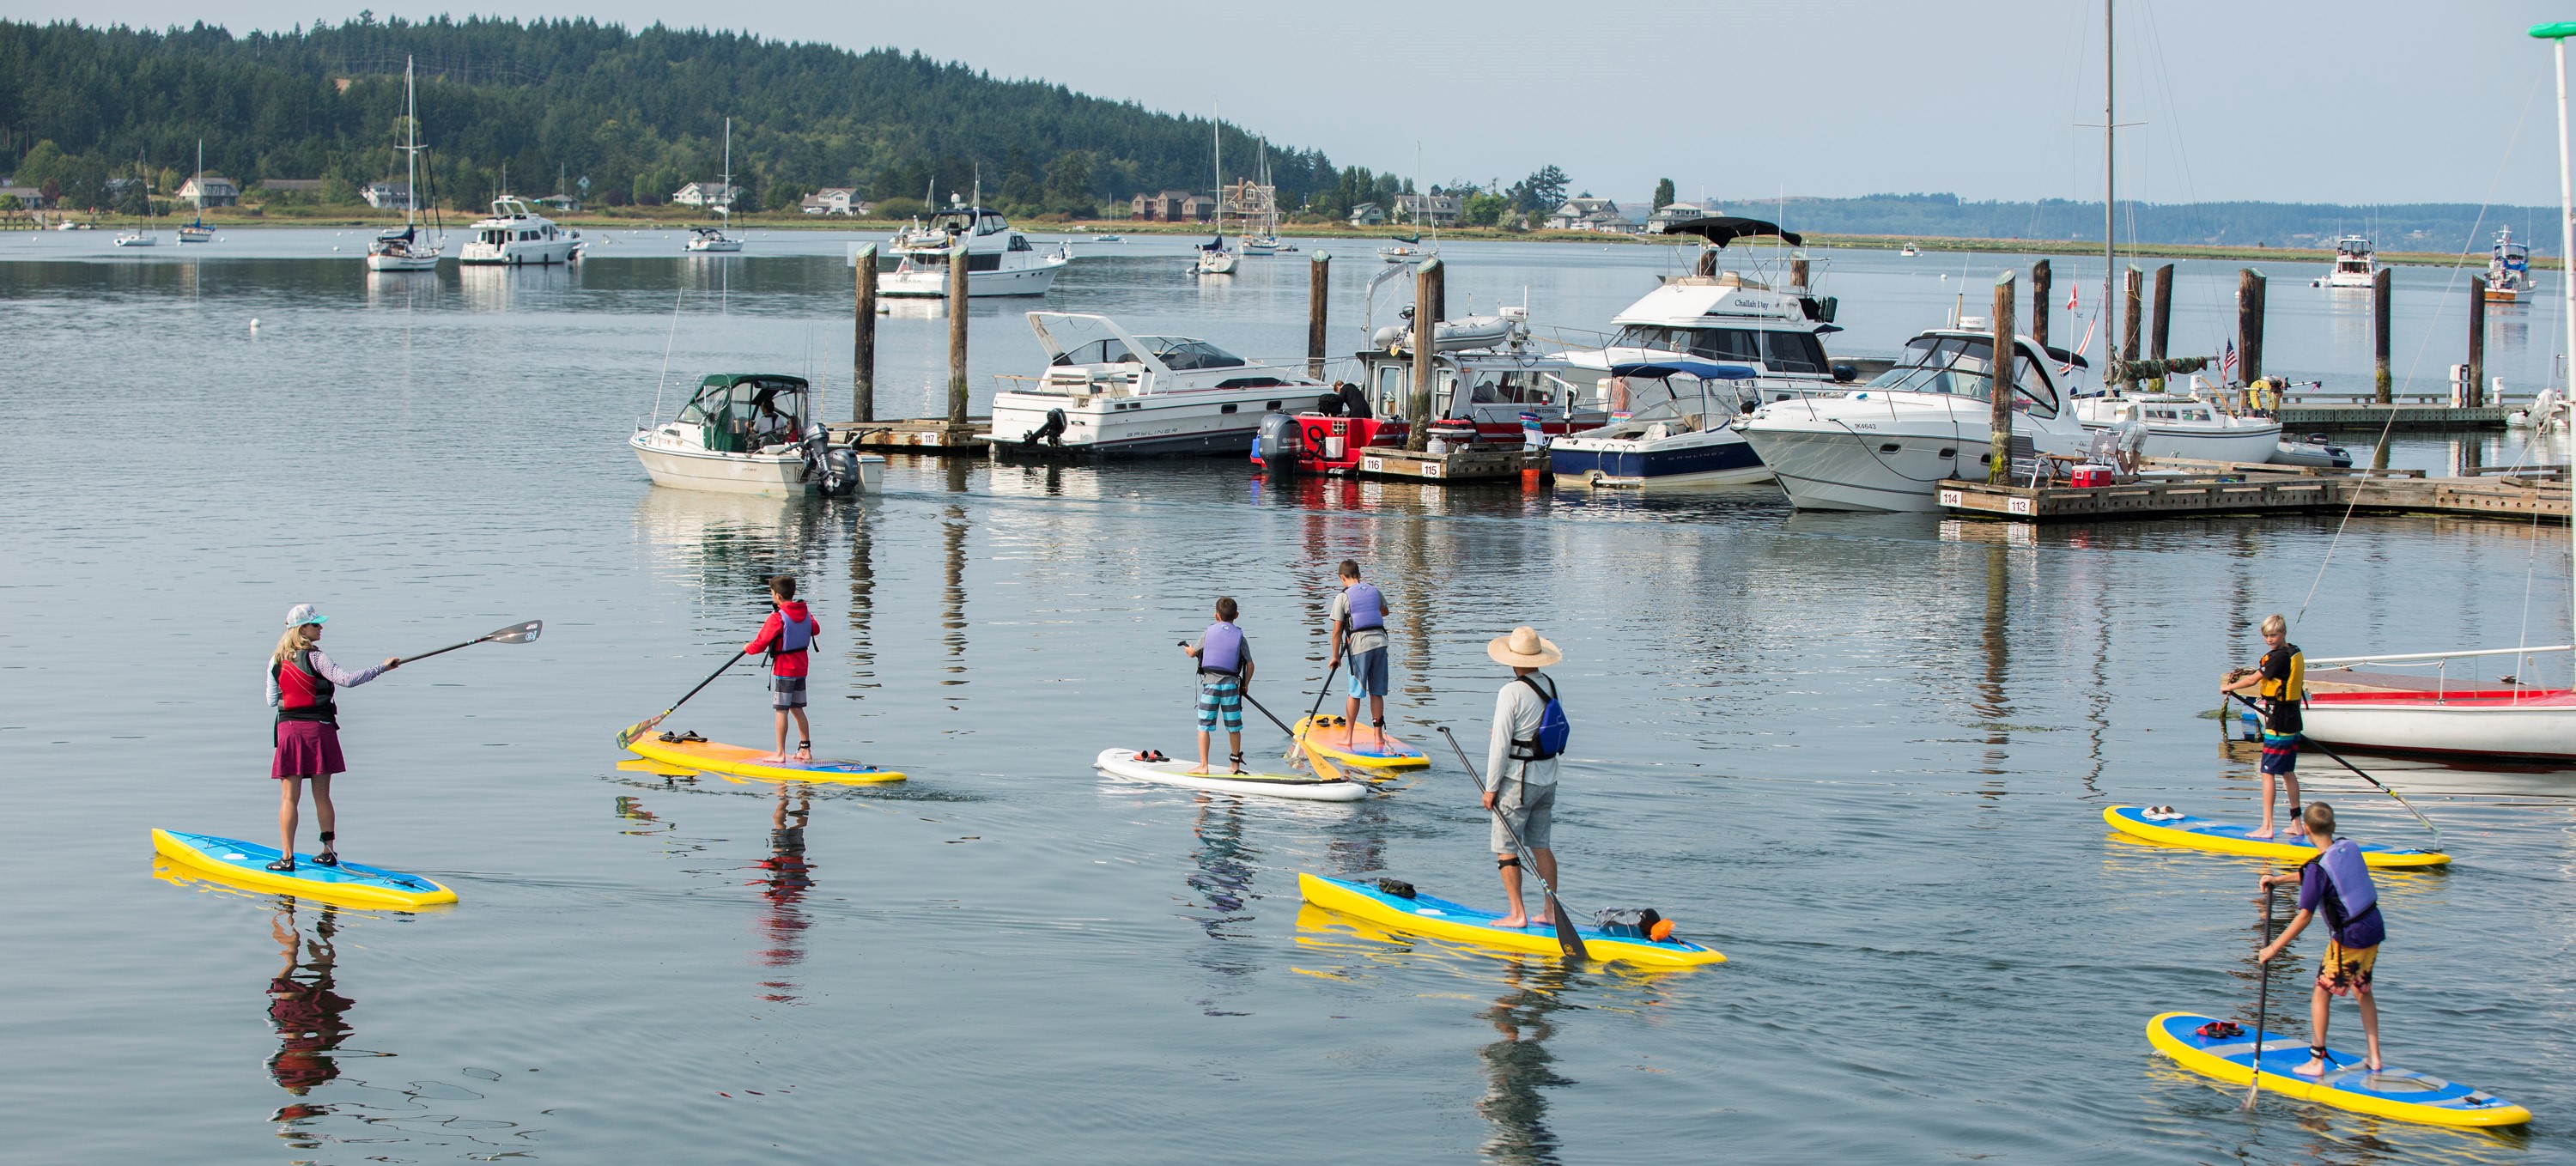 lopez island activities paddle boarding water